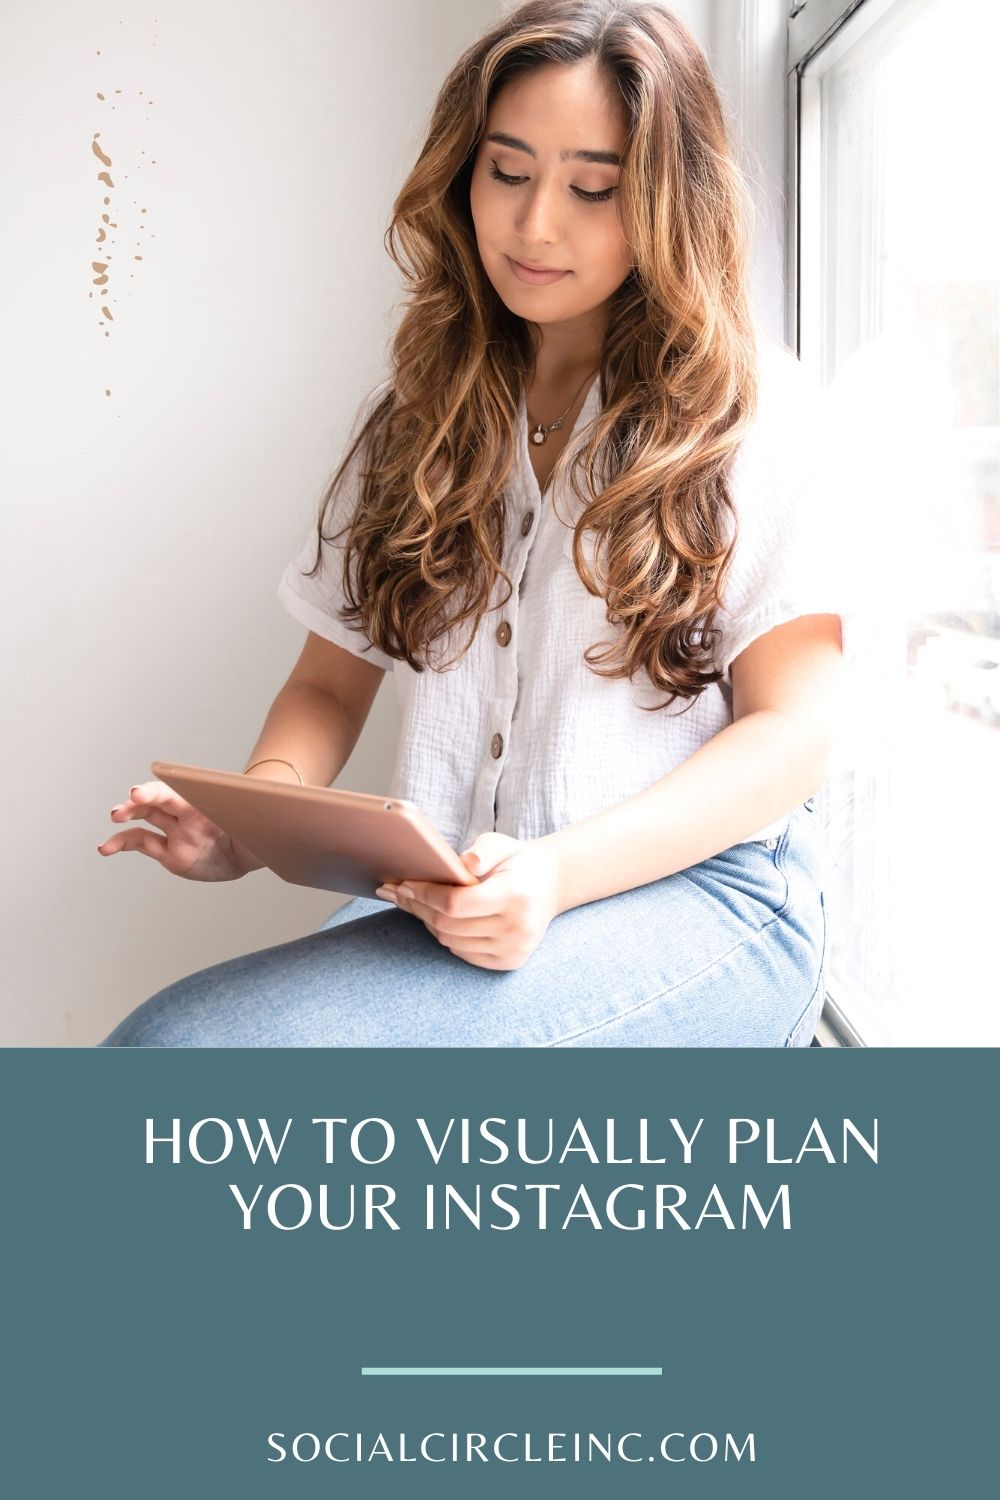 Visually PLan Your Instagram